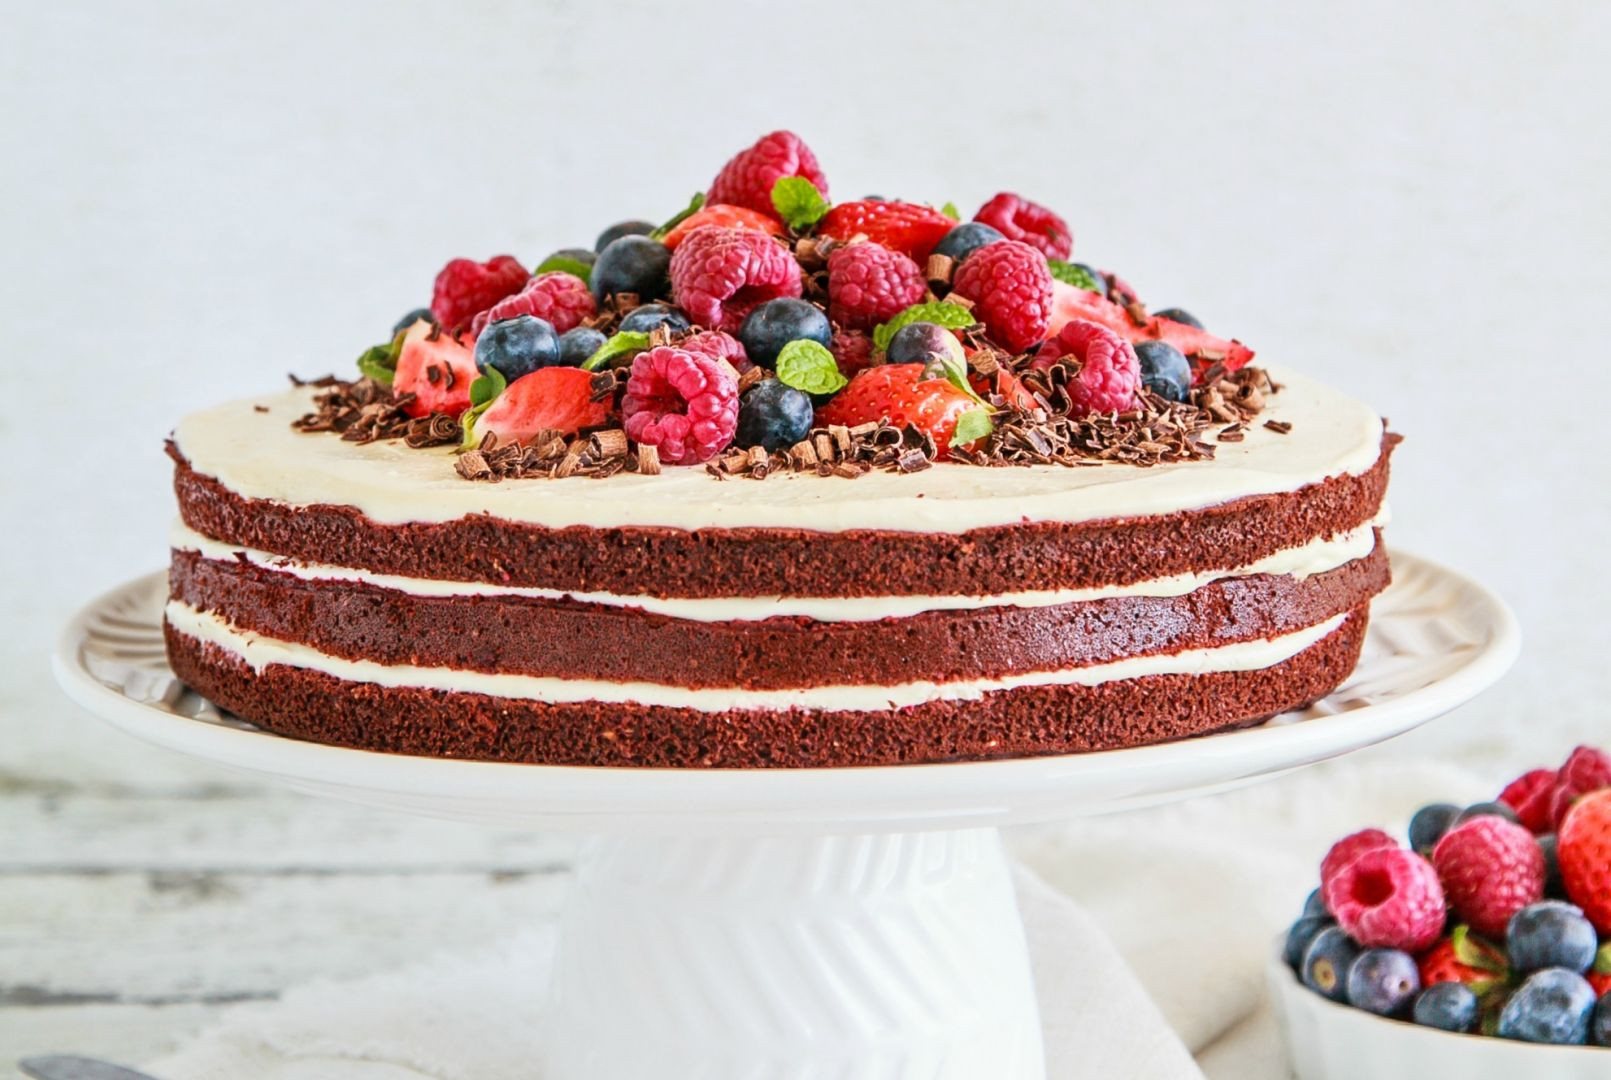 Healthy Birthday Cake Recipes
 Our Top Ten Healthy Birthday Cakes